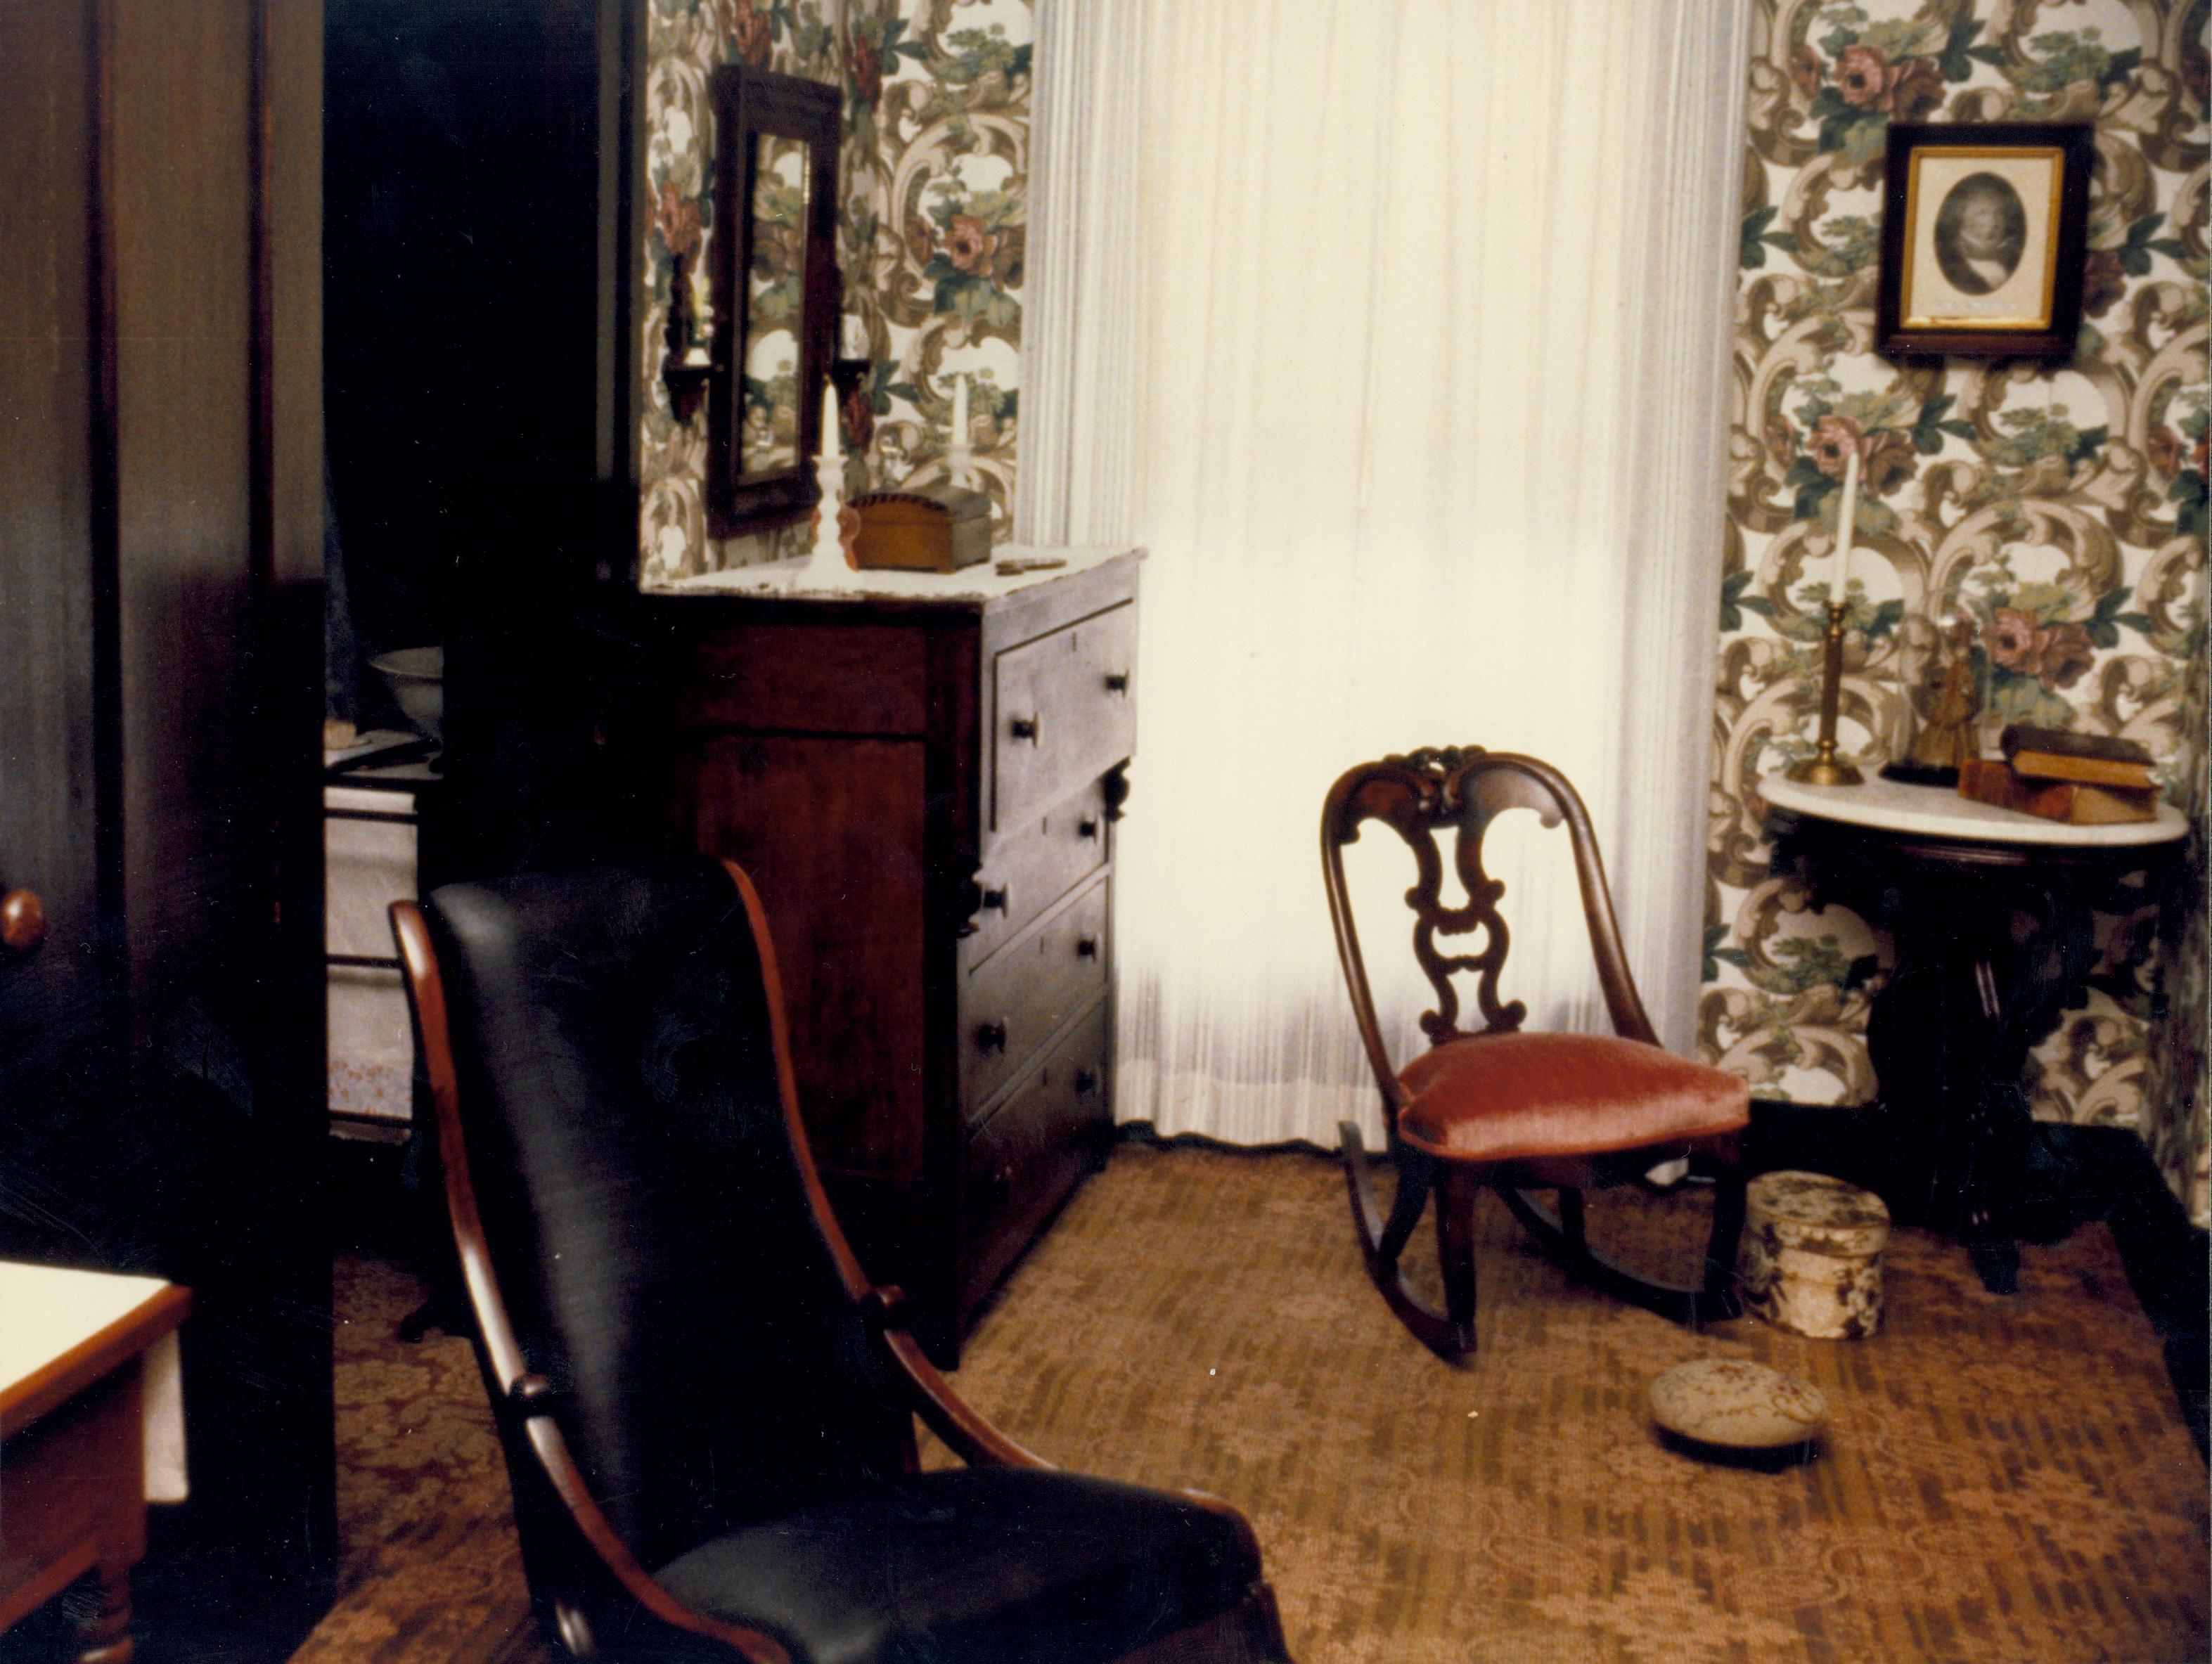 NA Lincoln, Home, Mrs., Mary, bedroom, chair, stove